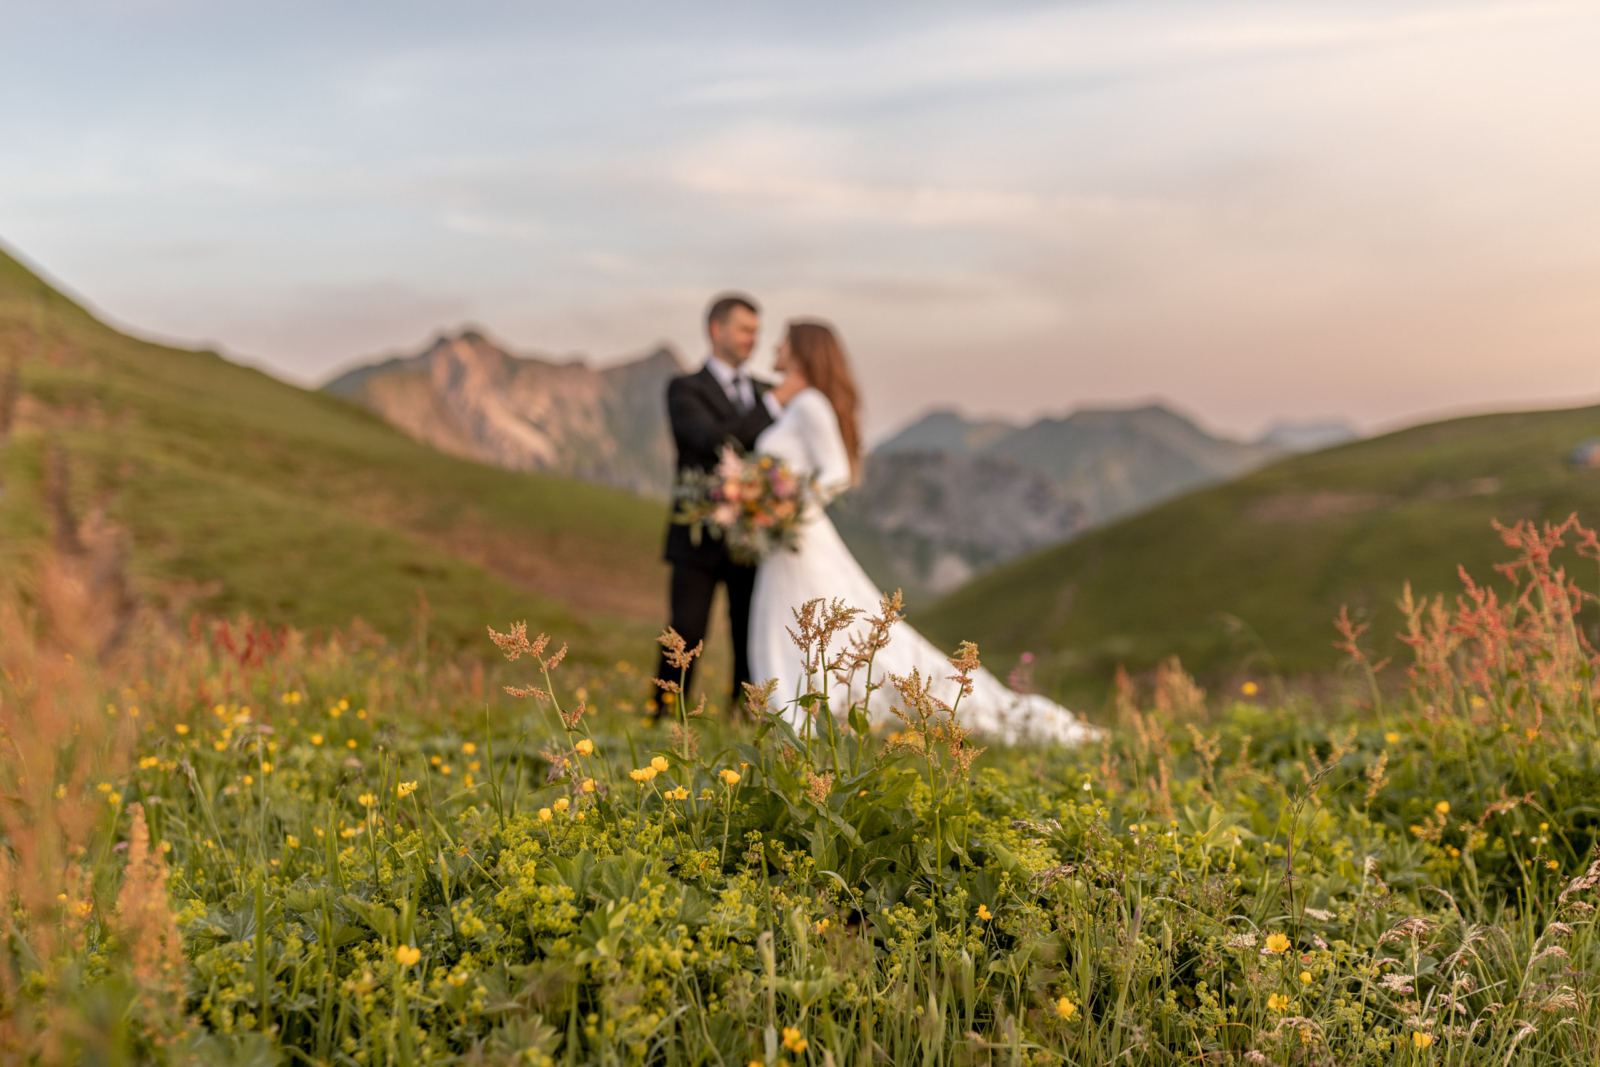 A Sunrise Wedding Amidst the Blooming Wildflowers in the Alps